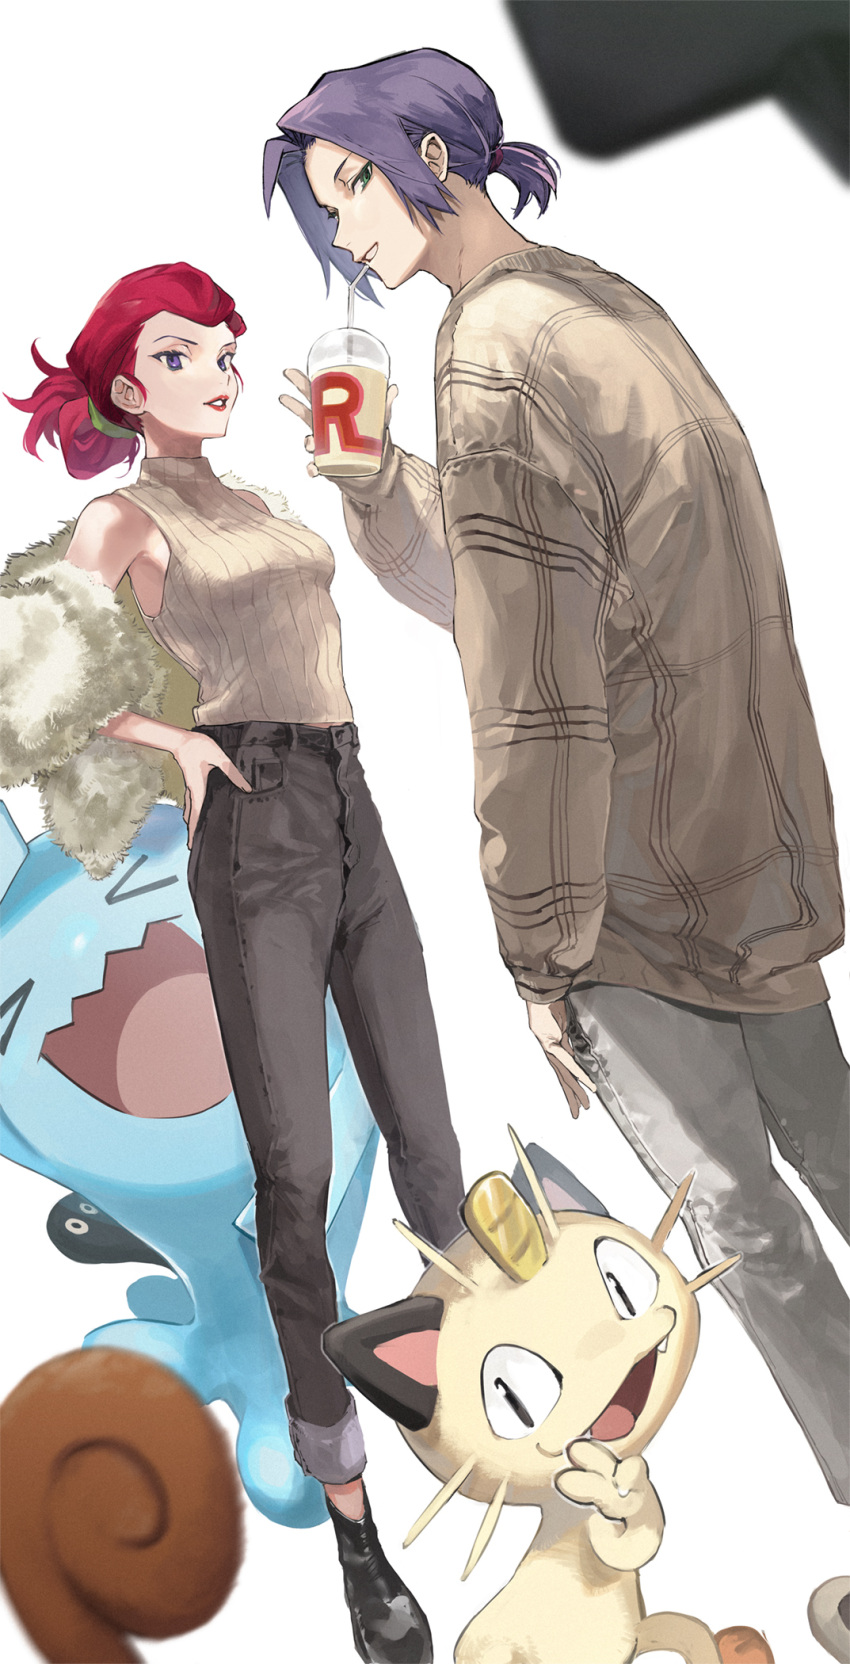 1boy 1girl alternate_costume bare_shoulders black_pants breasts casual cup denim drinking_straw fur_coat green_eyes grey_pants guru_(nicocco) hair_tie hands_on_hips highres holding holding_cup james_(pokemon) jessie_(pokemon) lipstick looking_at_viewer makeup meowth open_mouth pants pants_rolled_up parted_lips pink_hair pokemon pokemon_(anime) pokemon_(creature) ponytail purple_hair red_lips ribbed_sweater short_ponytail sleeveless sleeveless_sweater sleeveless_turtleneck sweater team_rocket teeth thumb_in_pocket turtleneck turtleneck_sweater v violet_eyes wobbuffet